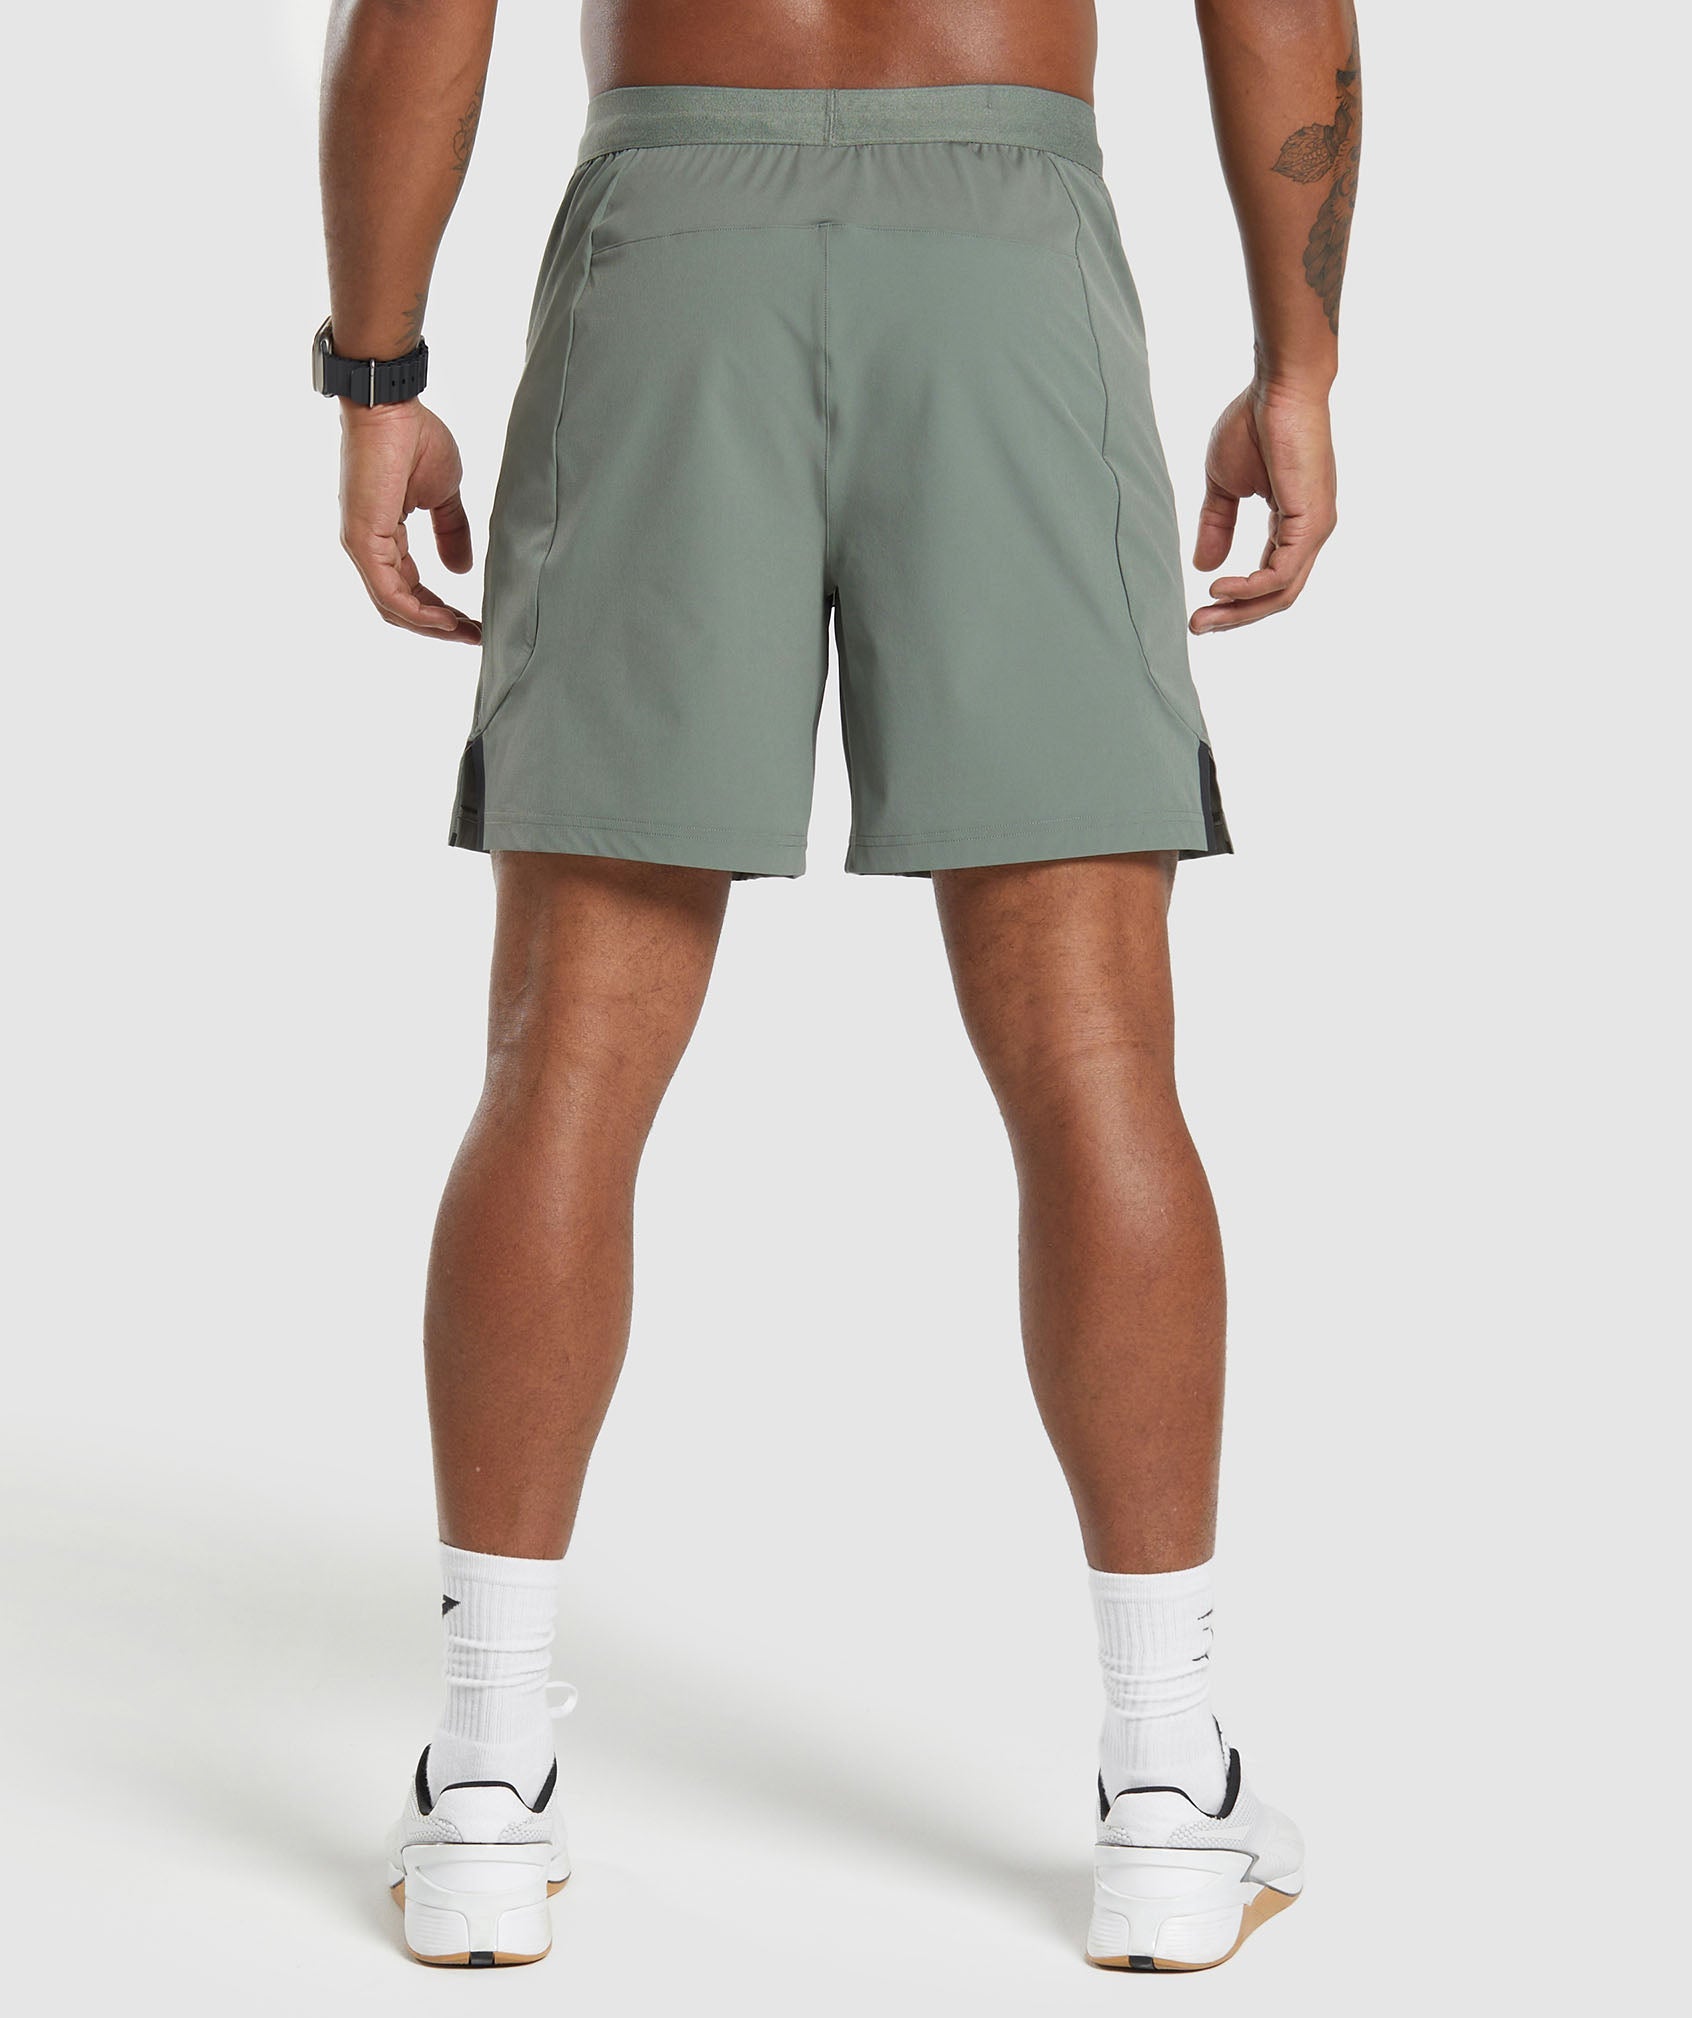 Apex 7" Hybrid Shorts in Unit Green - view 2